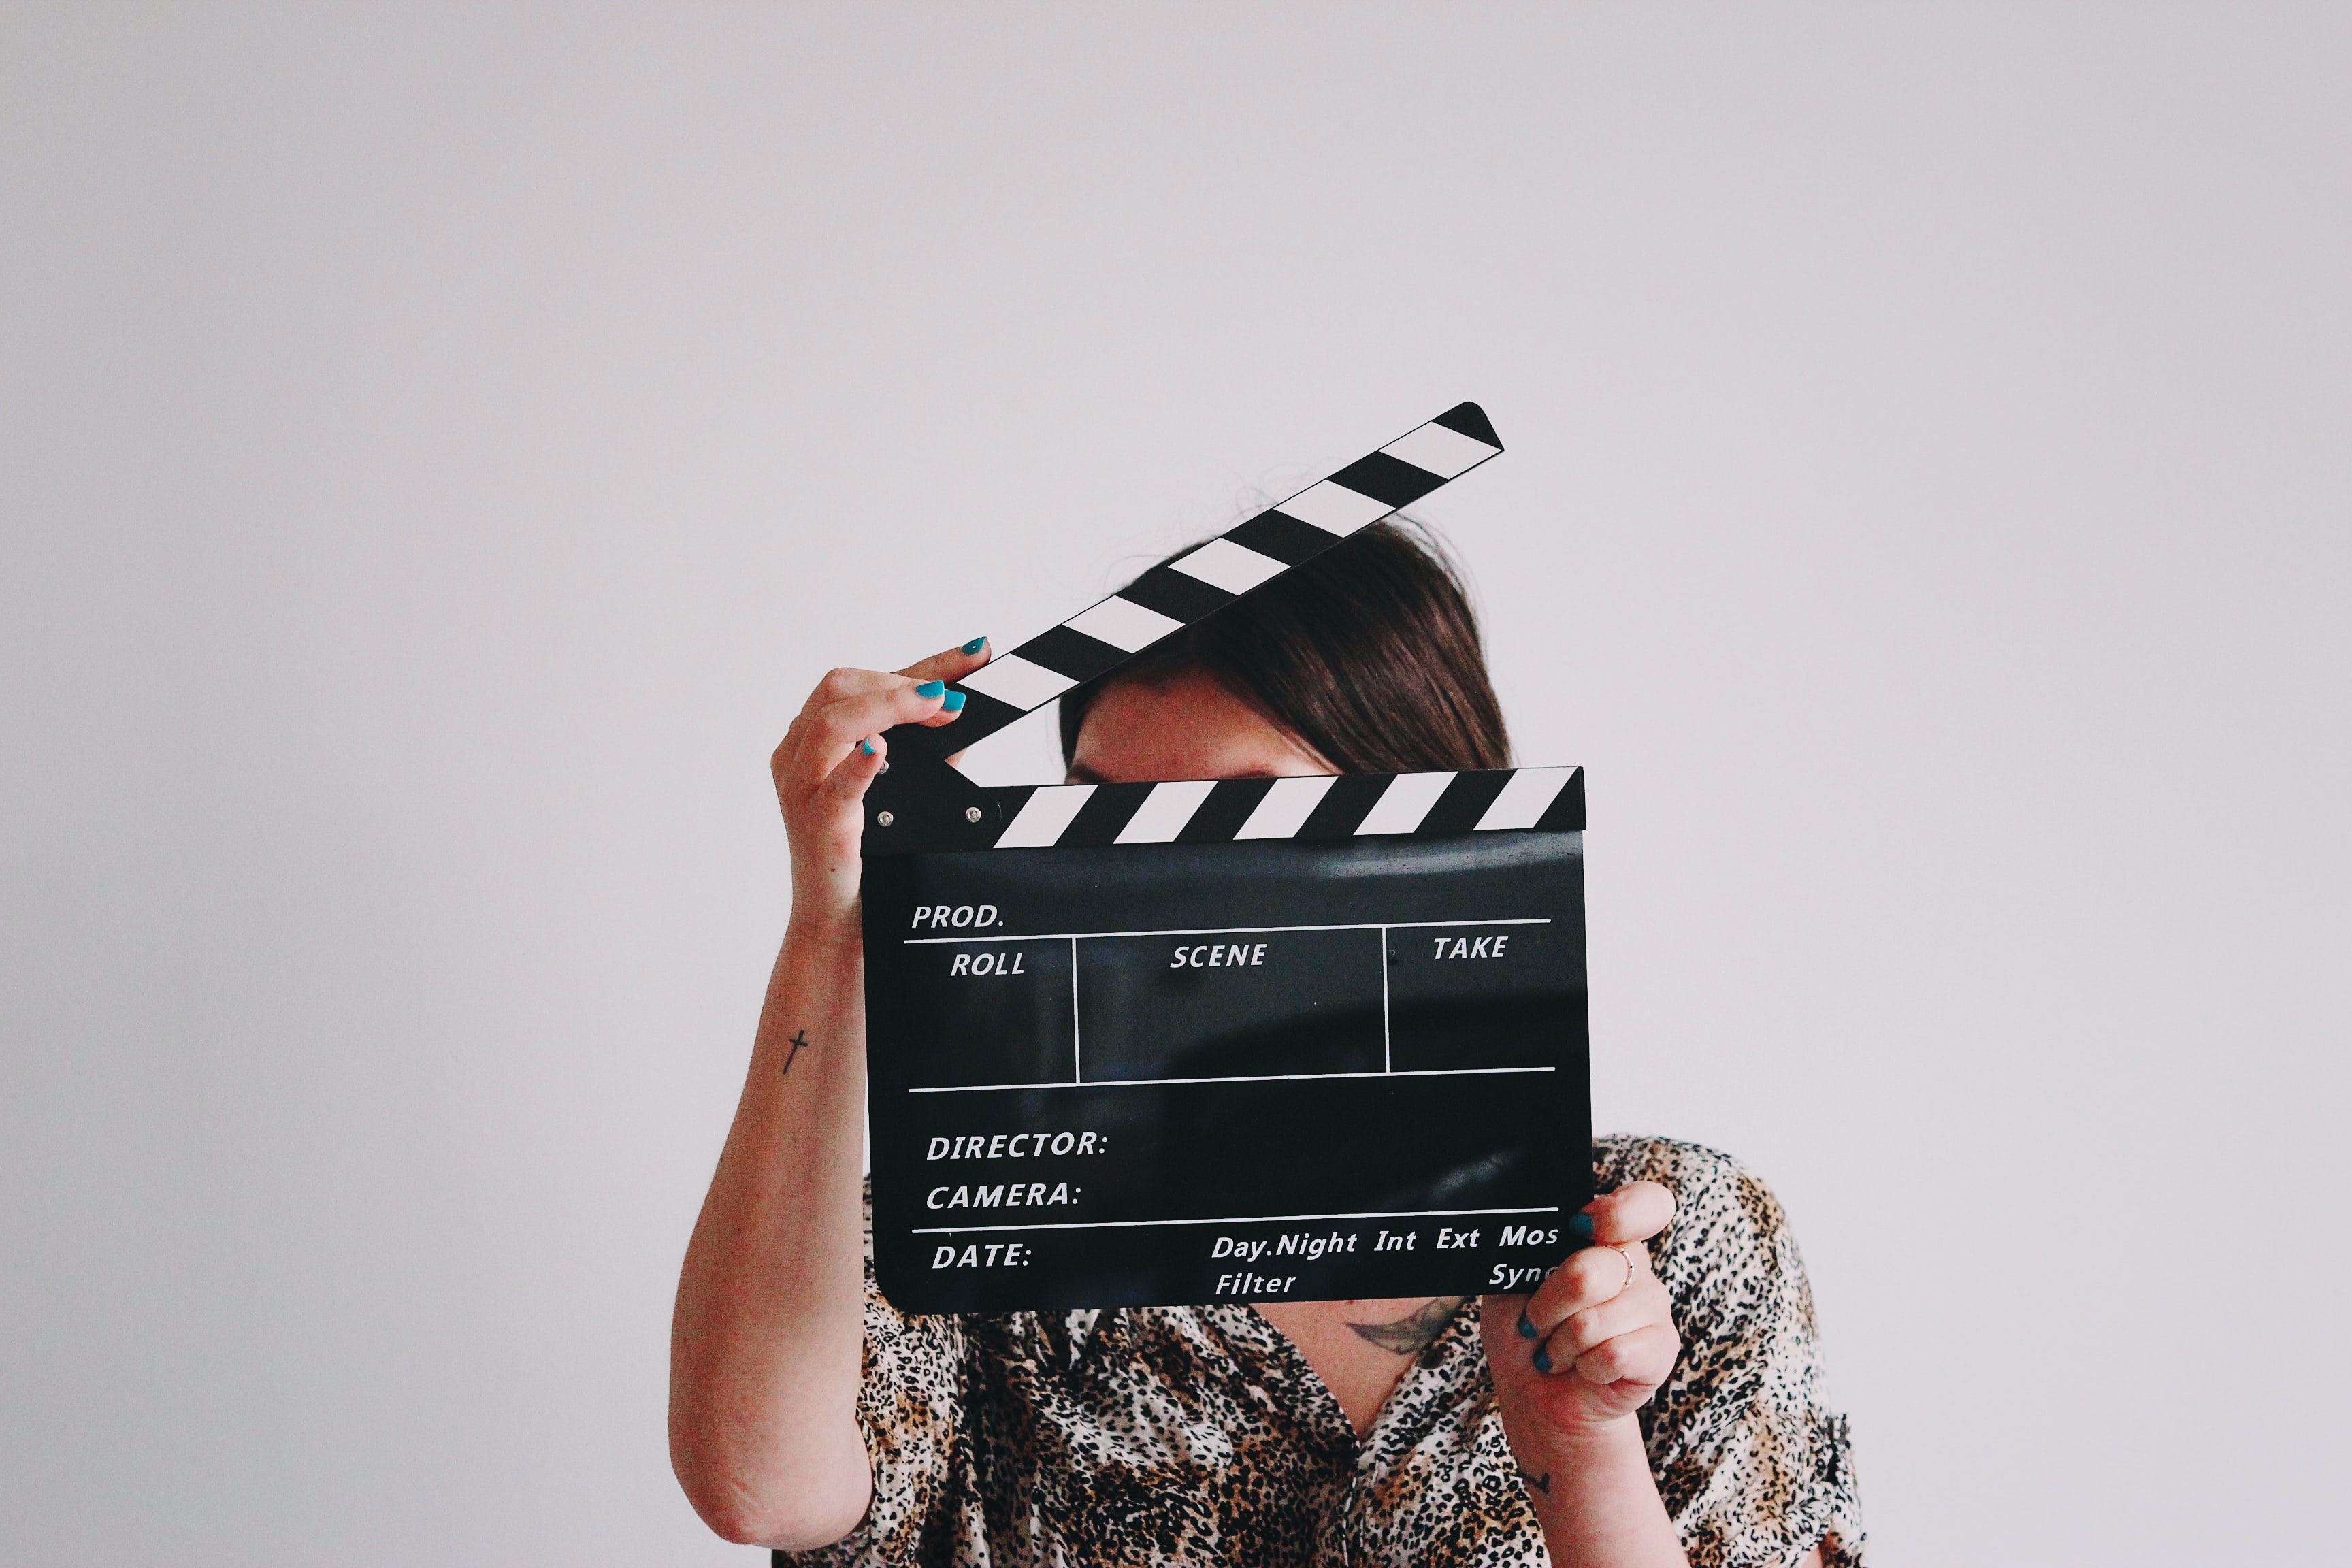 A woman holds a directing clapperboard in front of her face.